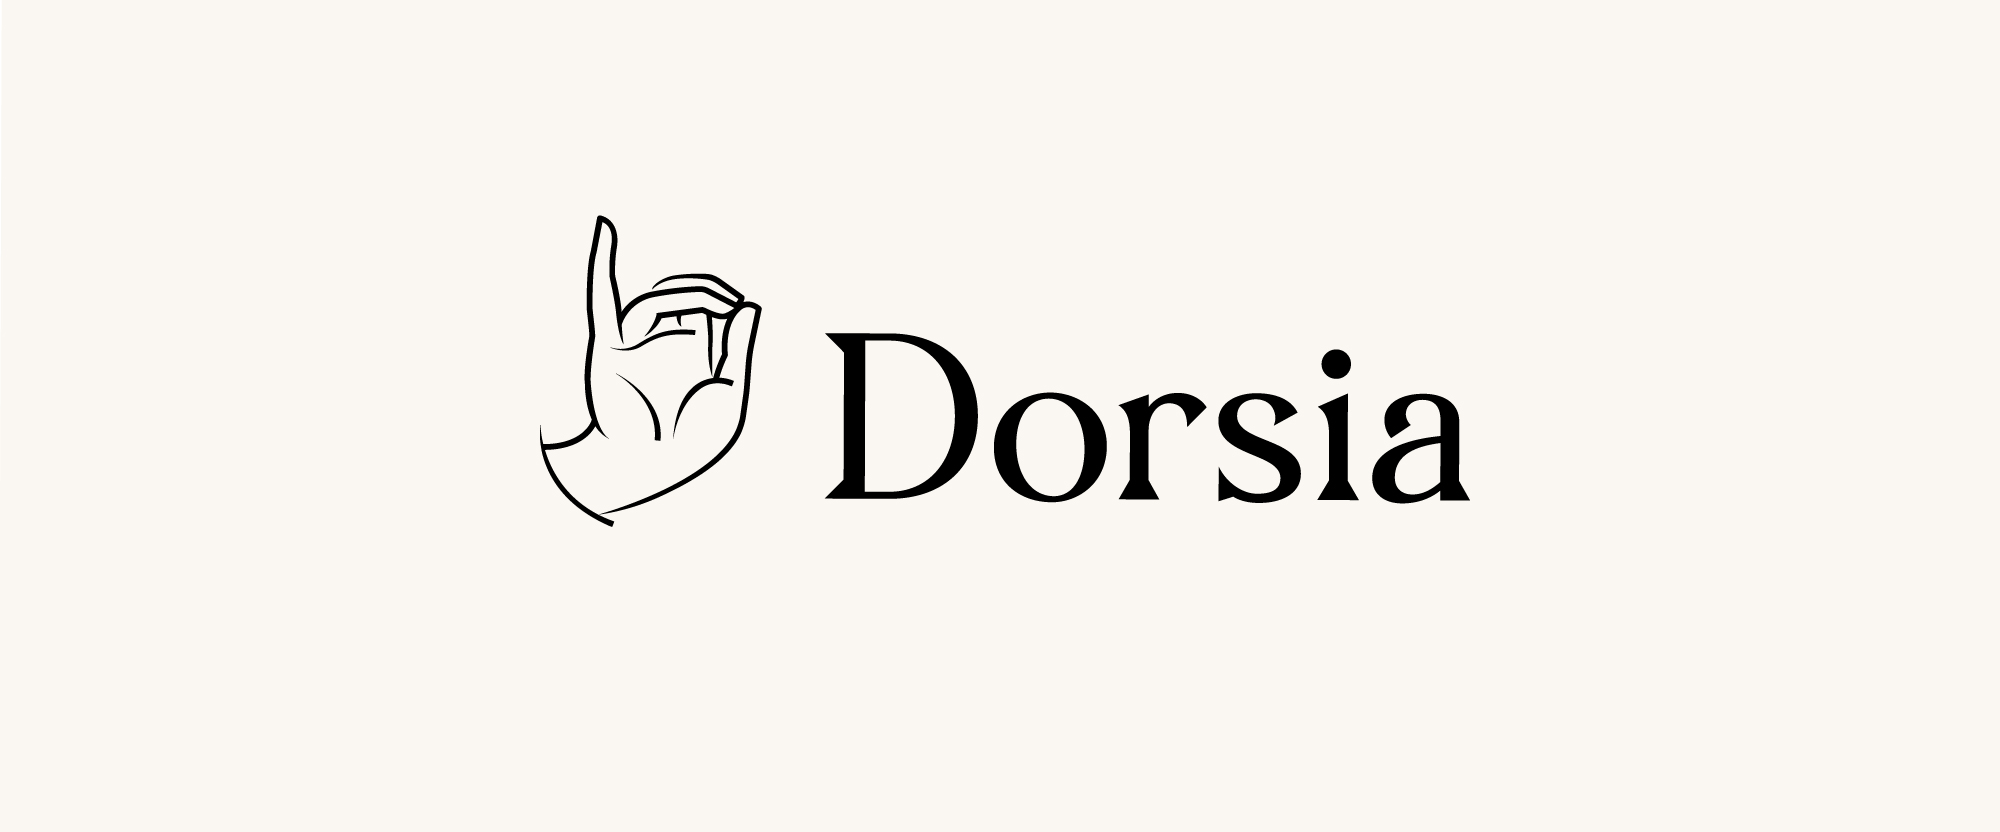 New Logo and Identity for Dorsia by ueno